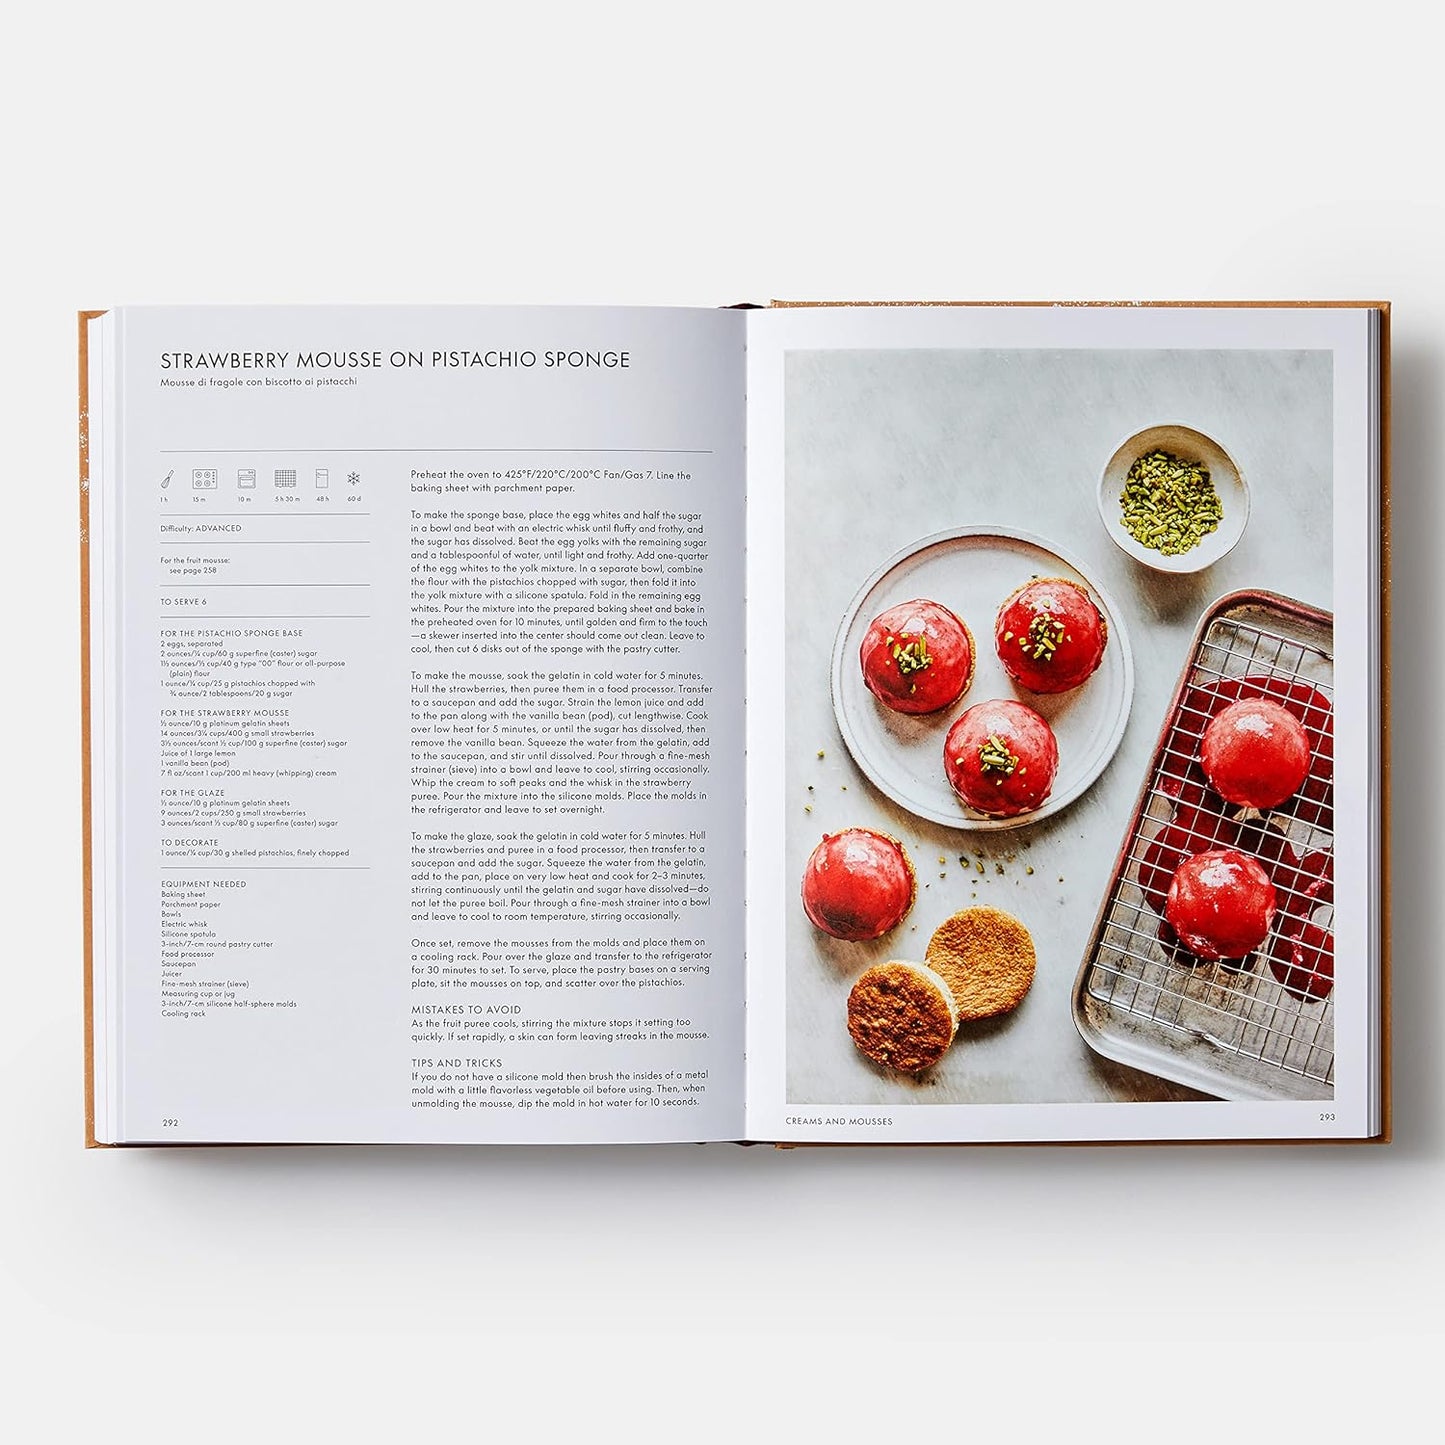 Italian Bakery: Step-By-Step Recipes with the Silver Spoon